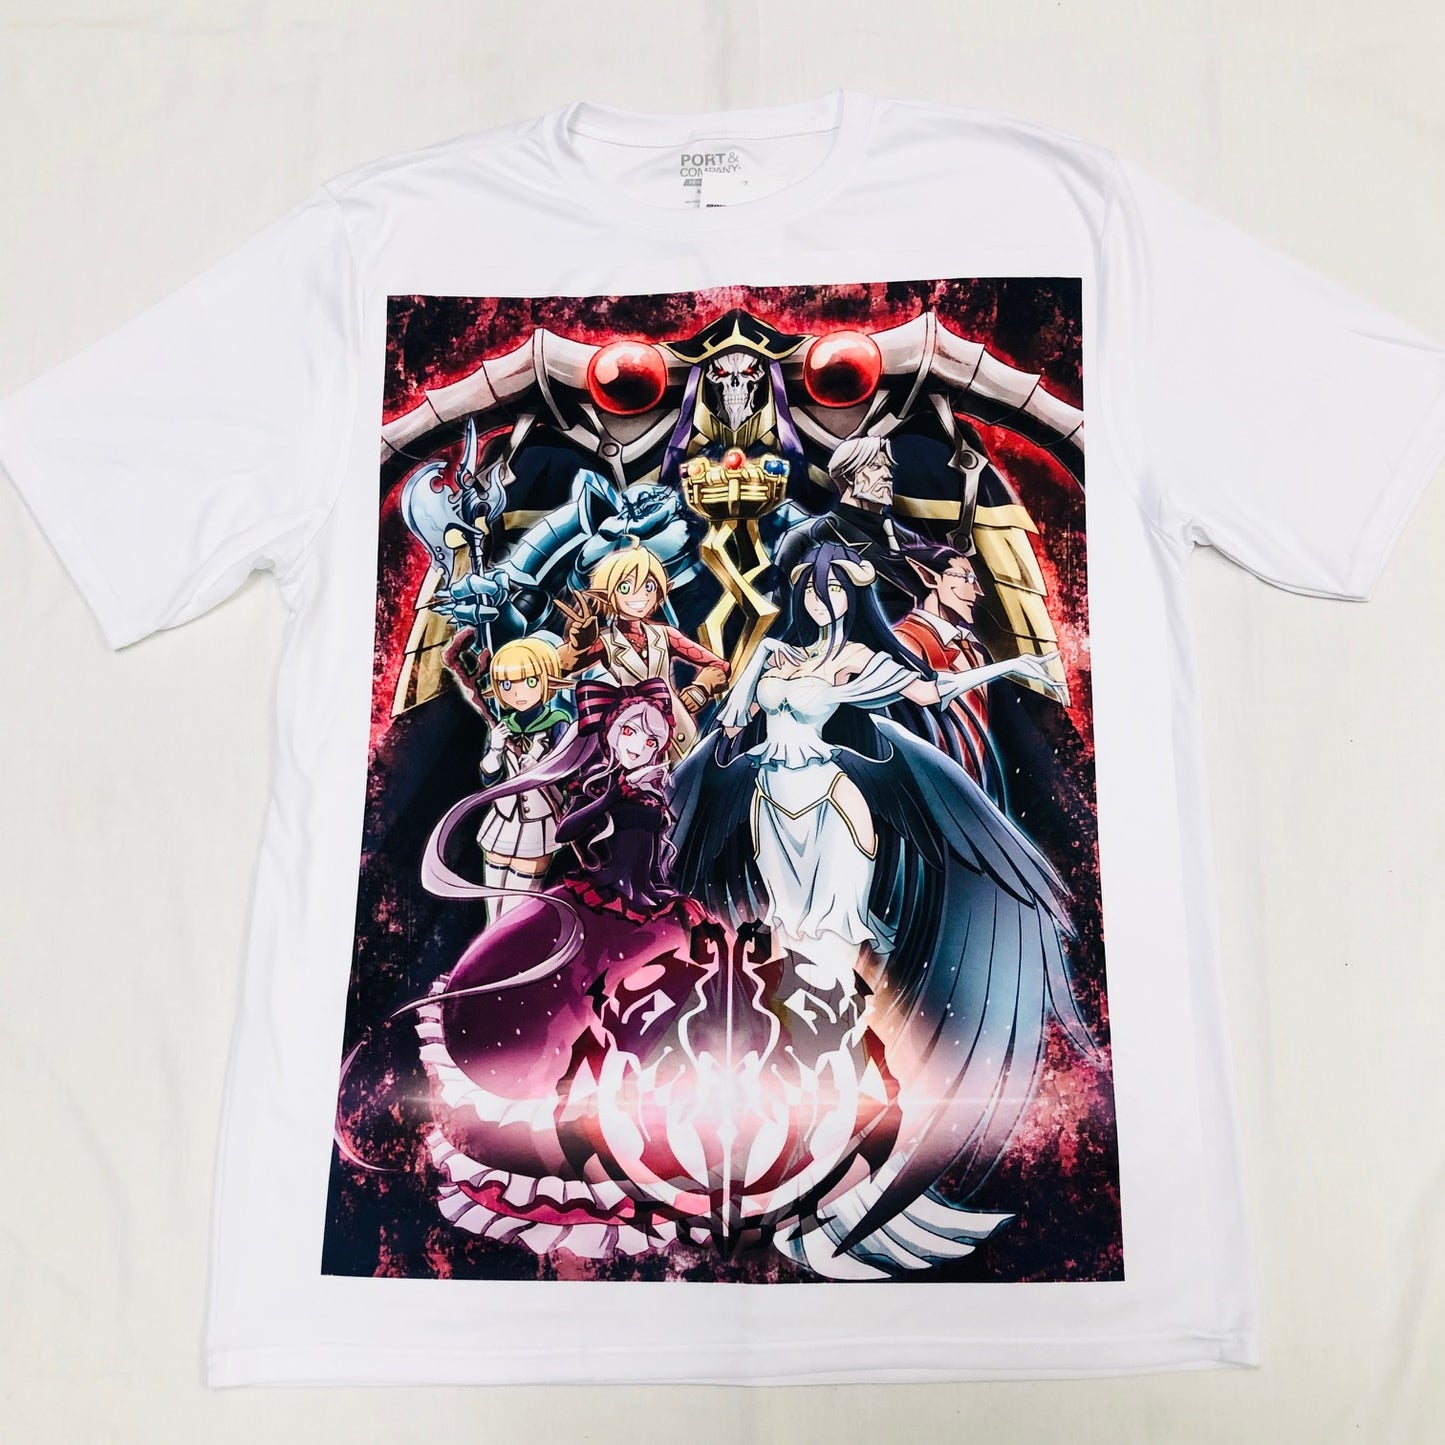 Anime Overlord T-Shirt - Super Anime Store FREE SHIPPING FAST SHIPPING USA